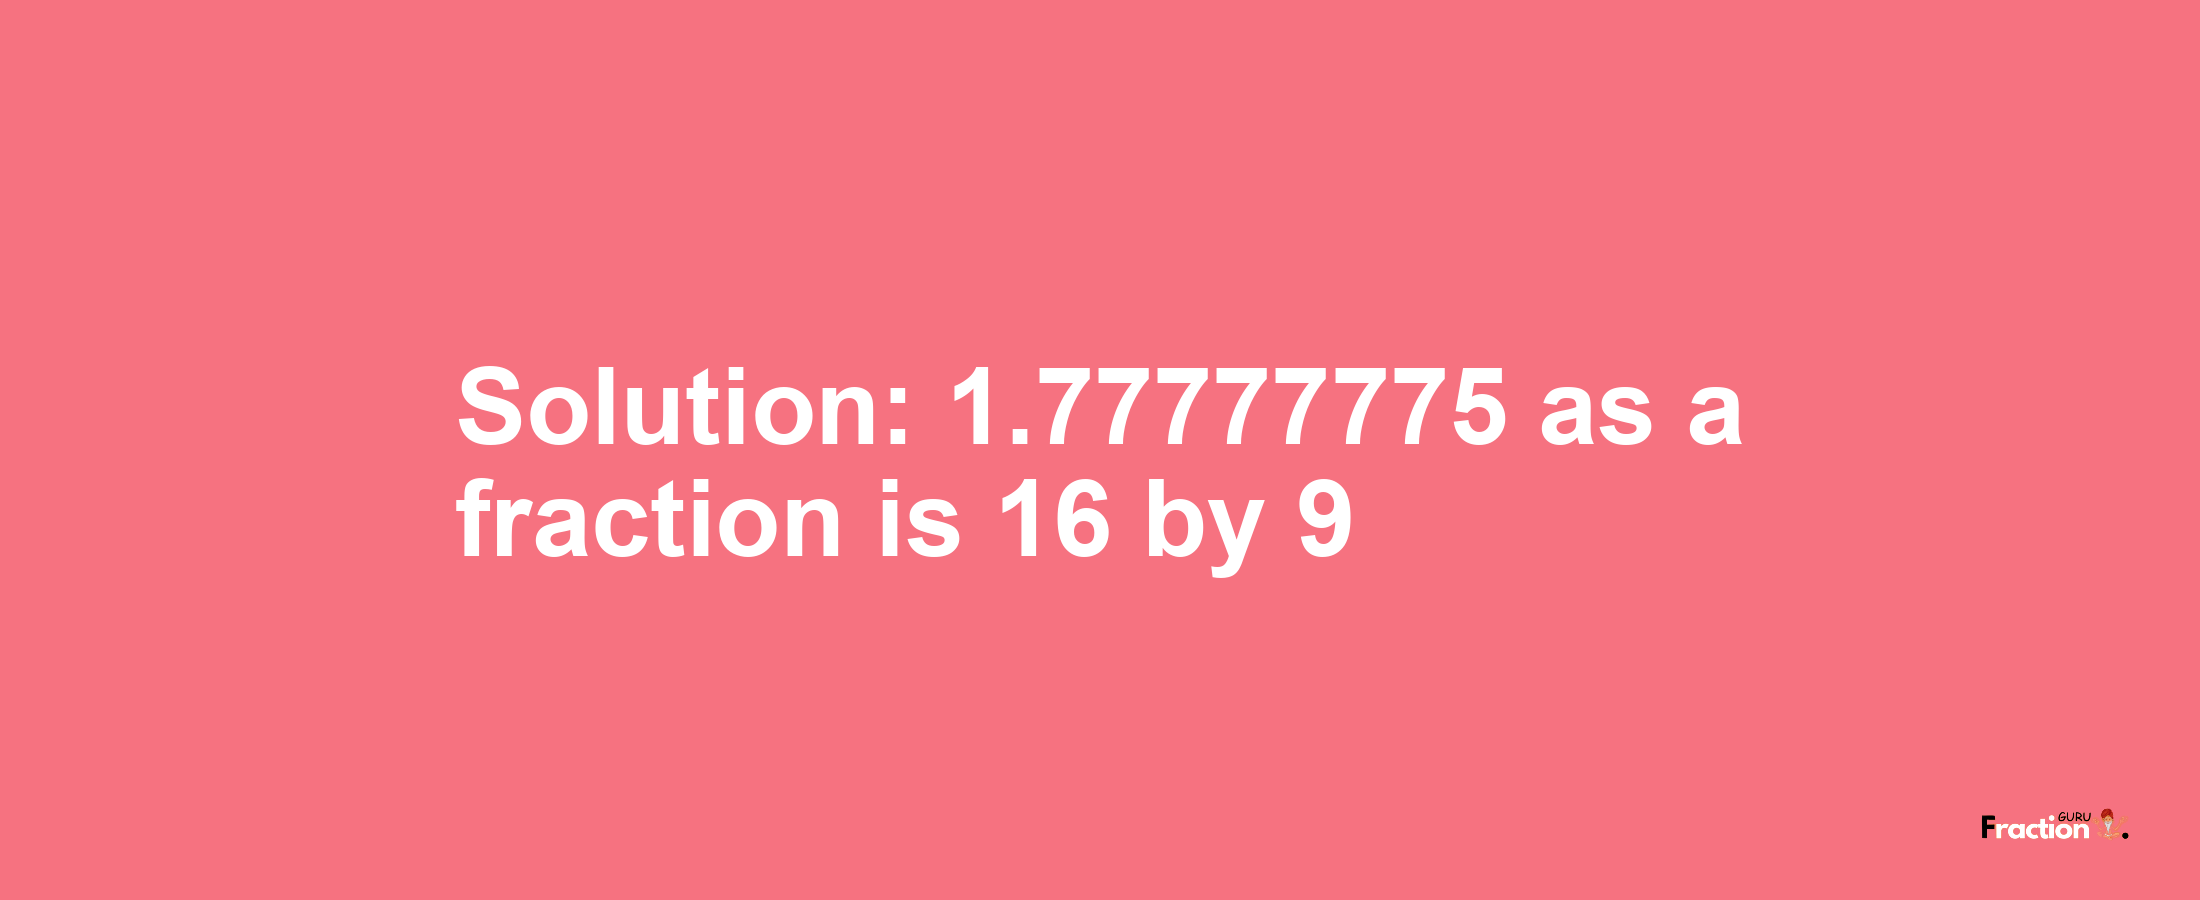 Solution:1.77777775 as a fraction is 16/9